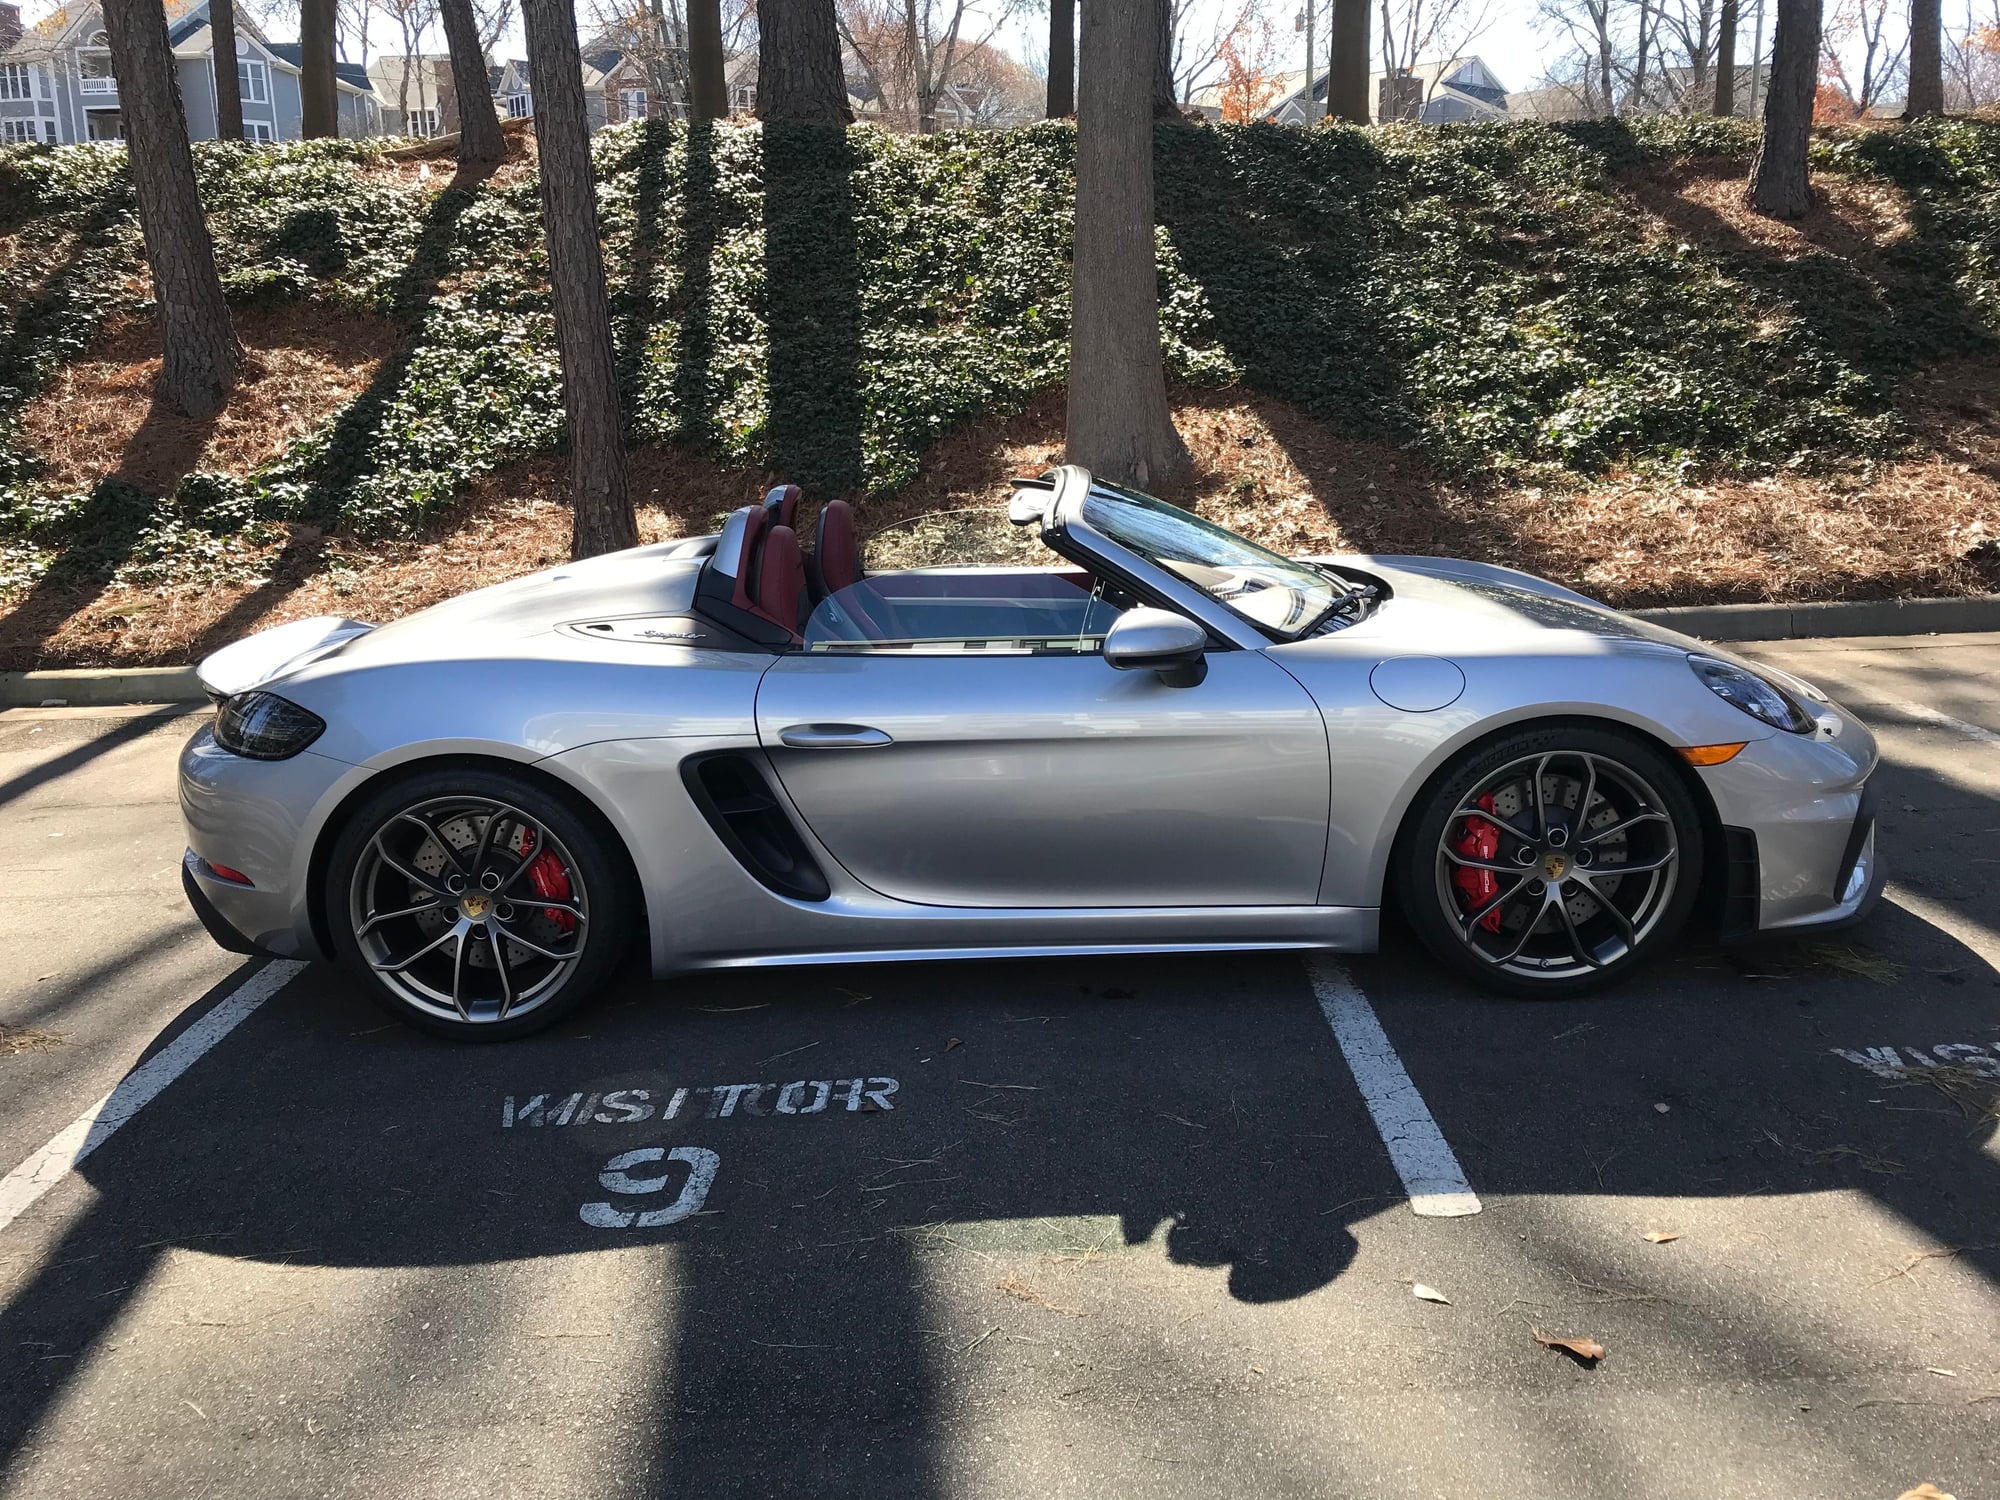 2021 Porsche 718 Spyder -  - Used - VIN WP0CC2A84MS240392 - 1,745 Miles - 6 cyl - 2WD - Manual - Convertible - Silver - Raleigh, NC 27605, United States